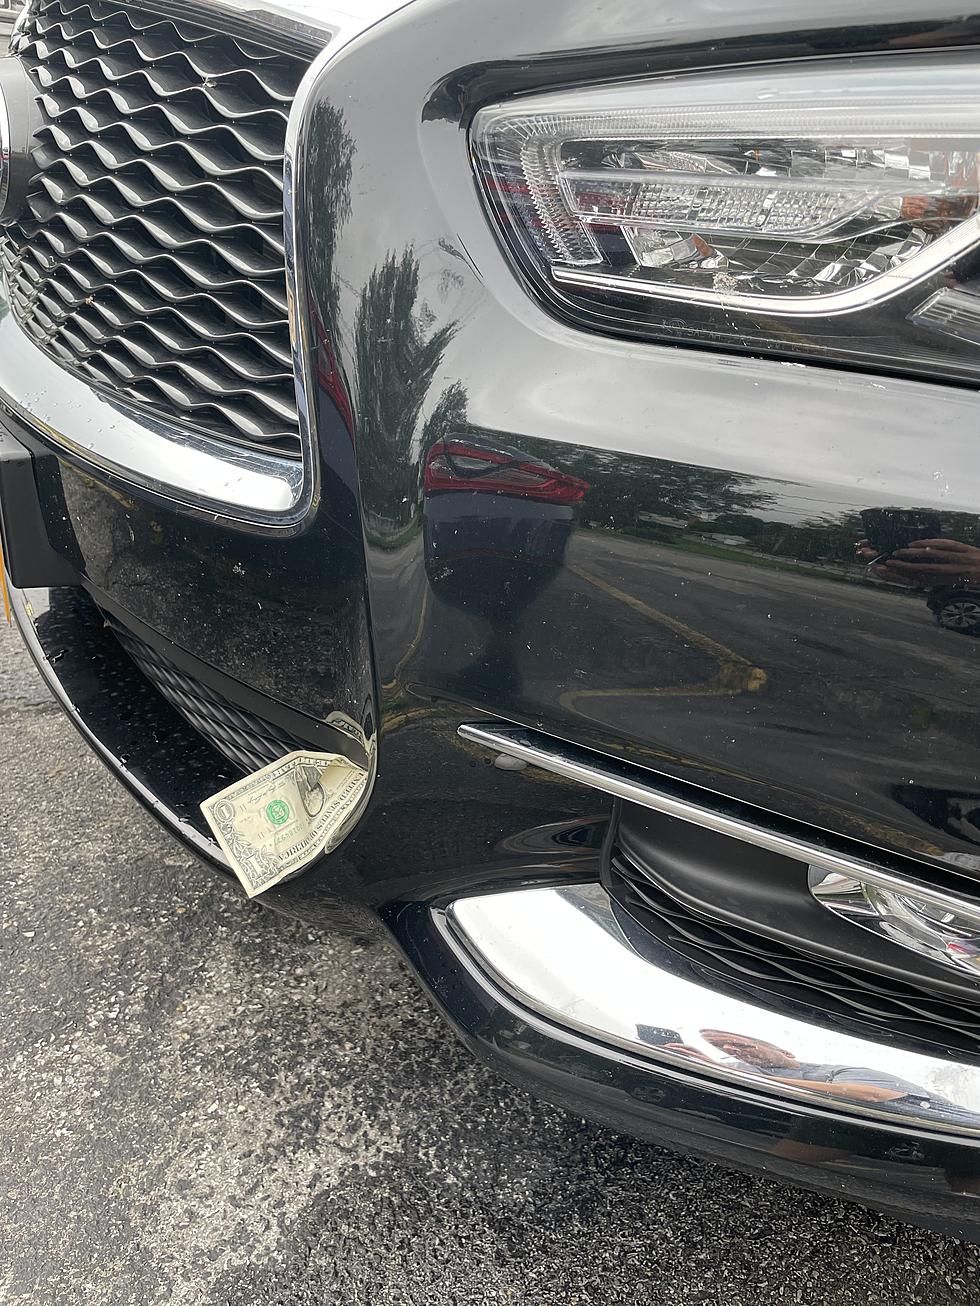 If You Find A Dollar Bill in Your Car Bumper, Don’t Take It